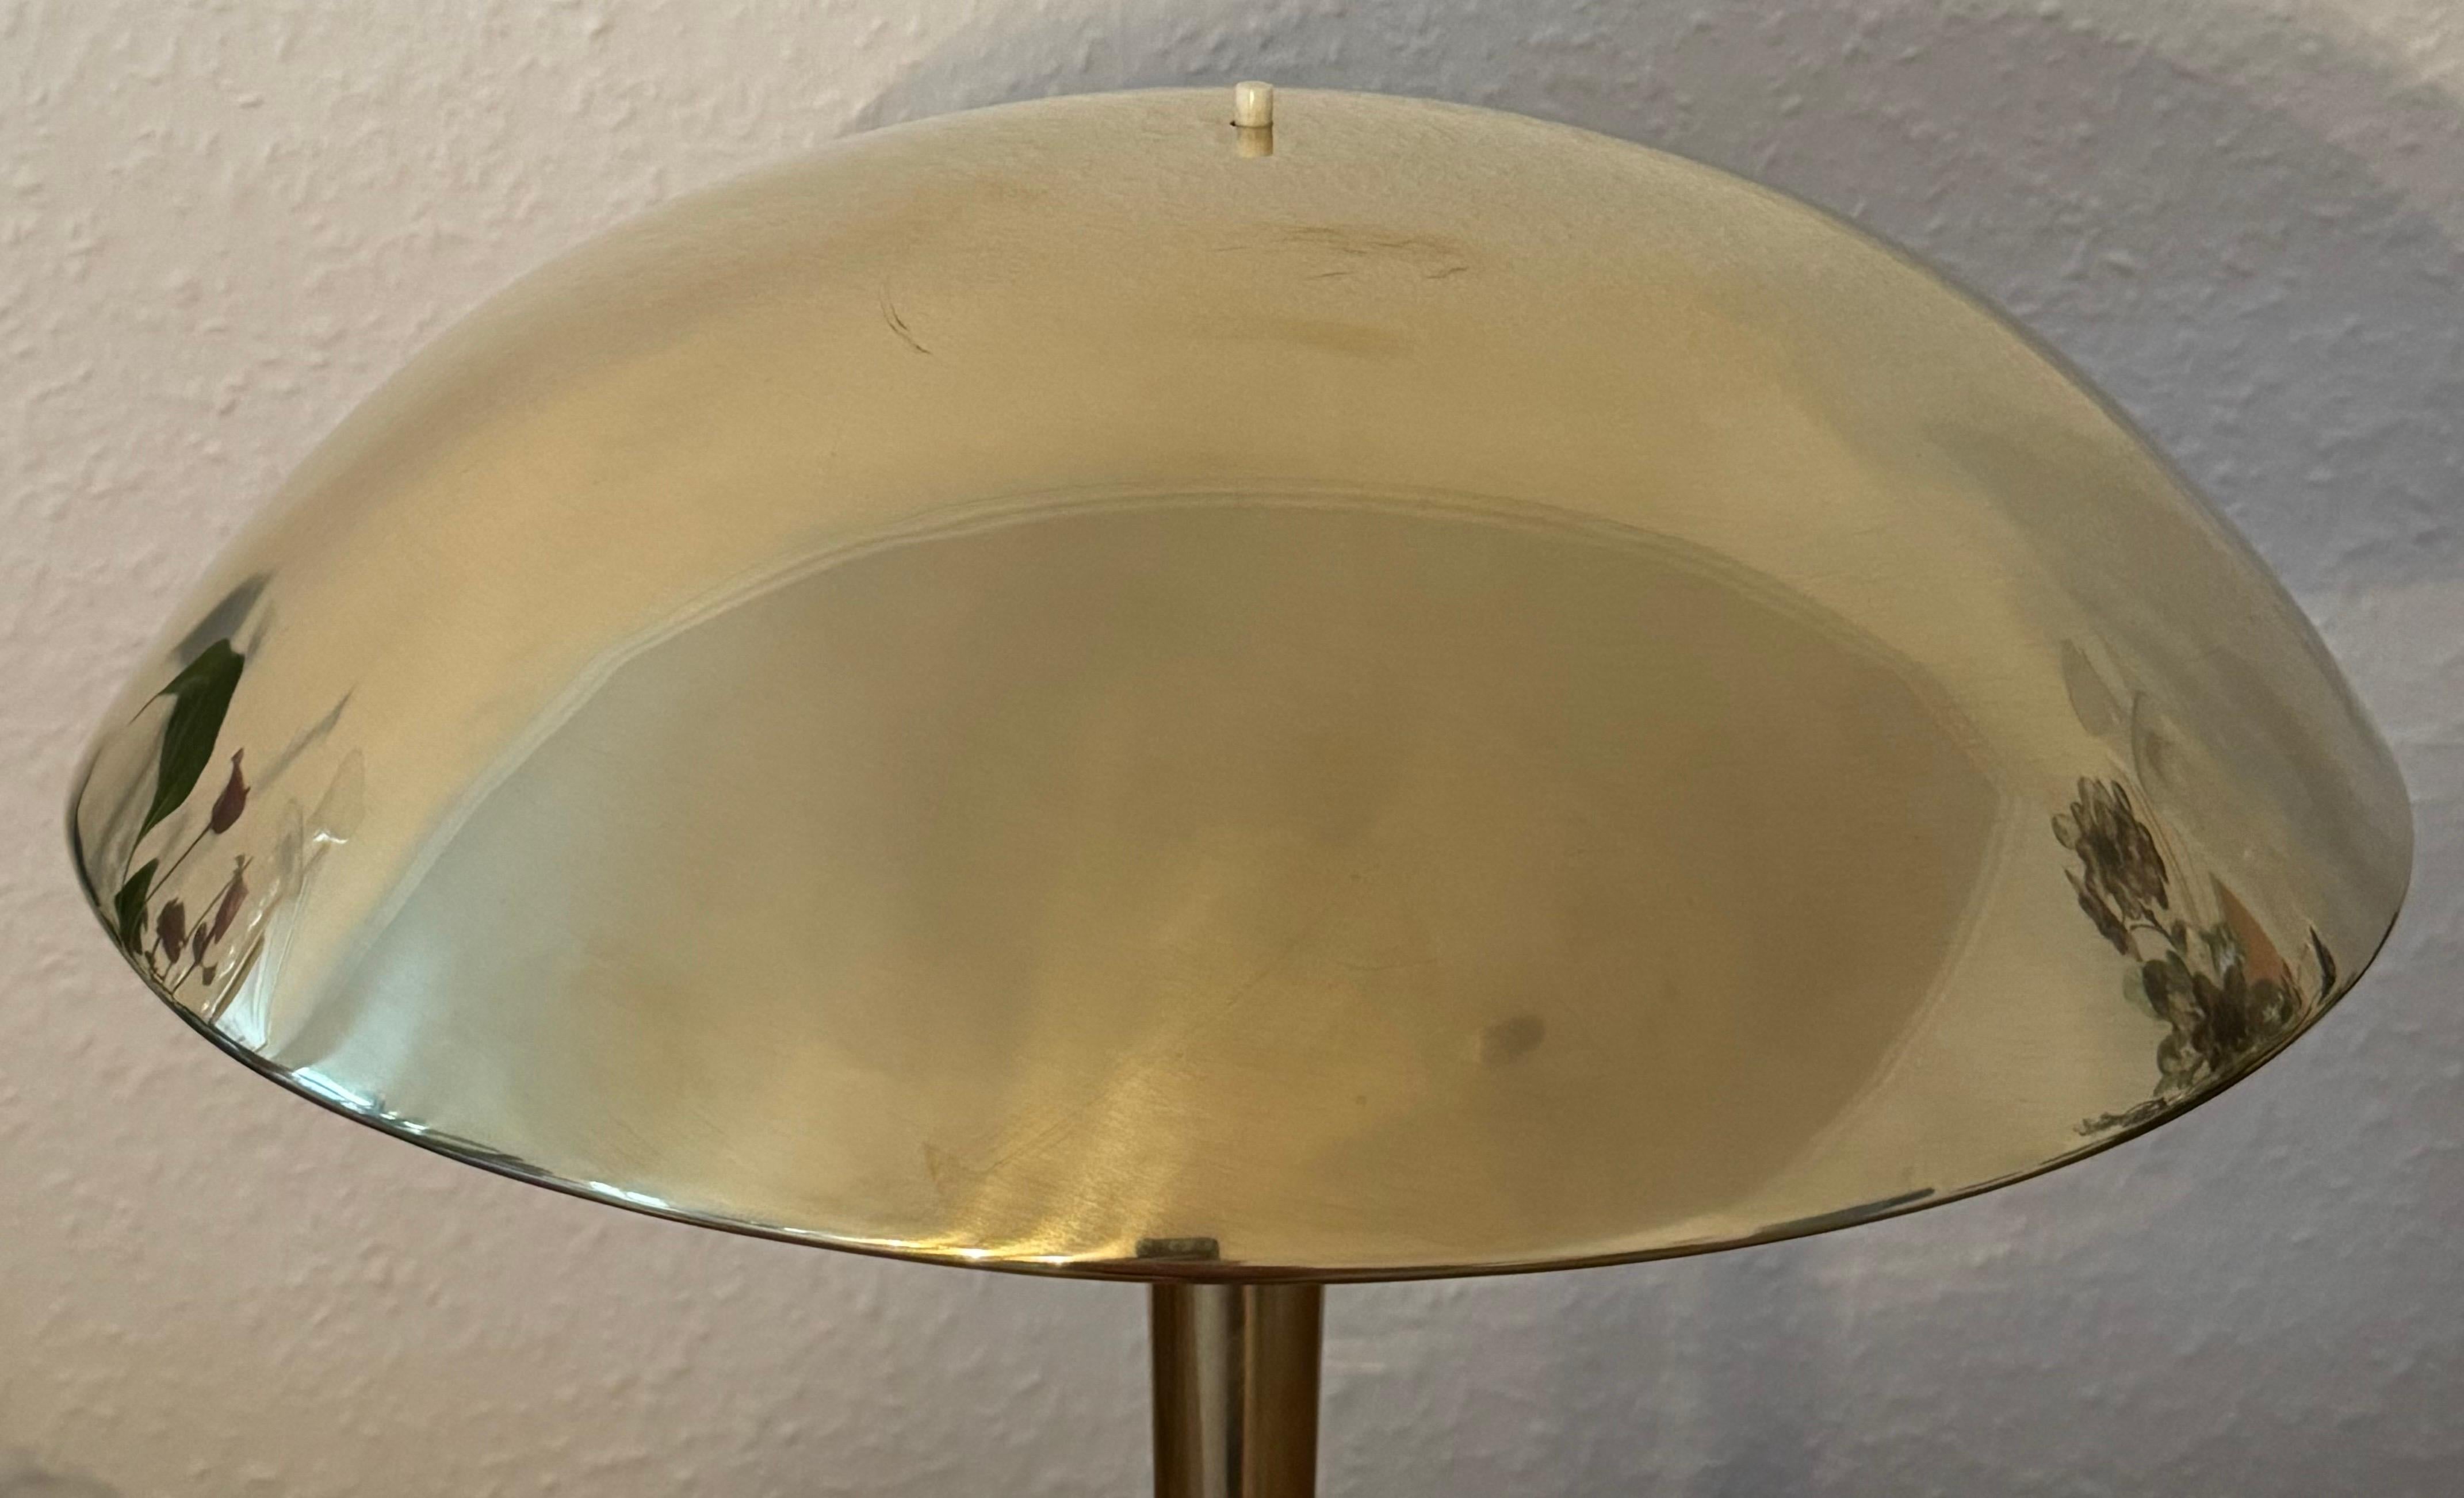 Polished Rare Brass Table Lamp Mod. 5061 by Paavo Tynell for Taito, Finland, ca. 1940s For Sale